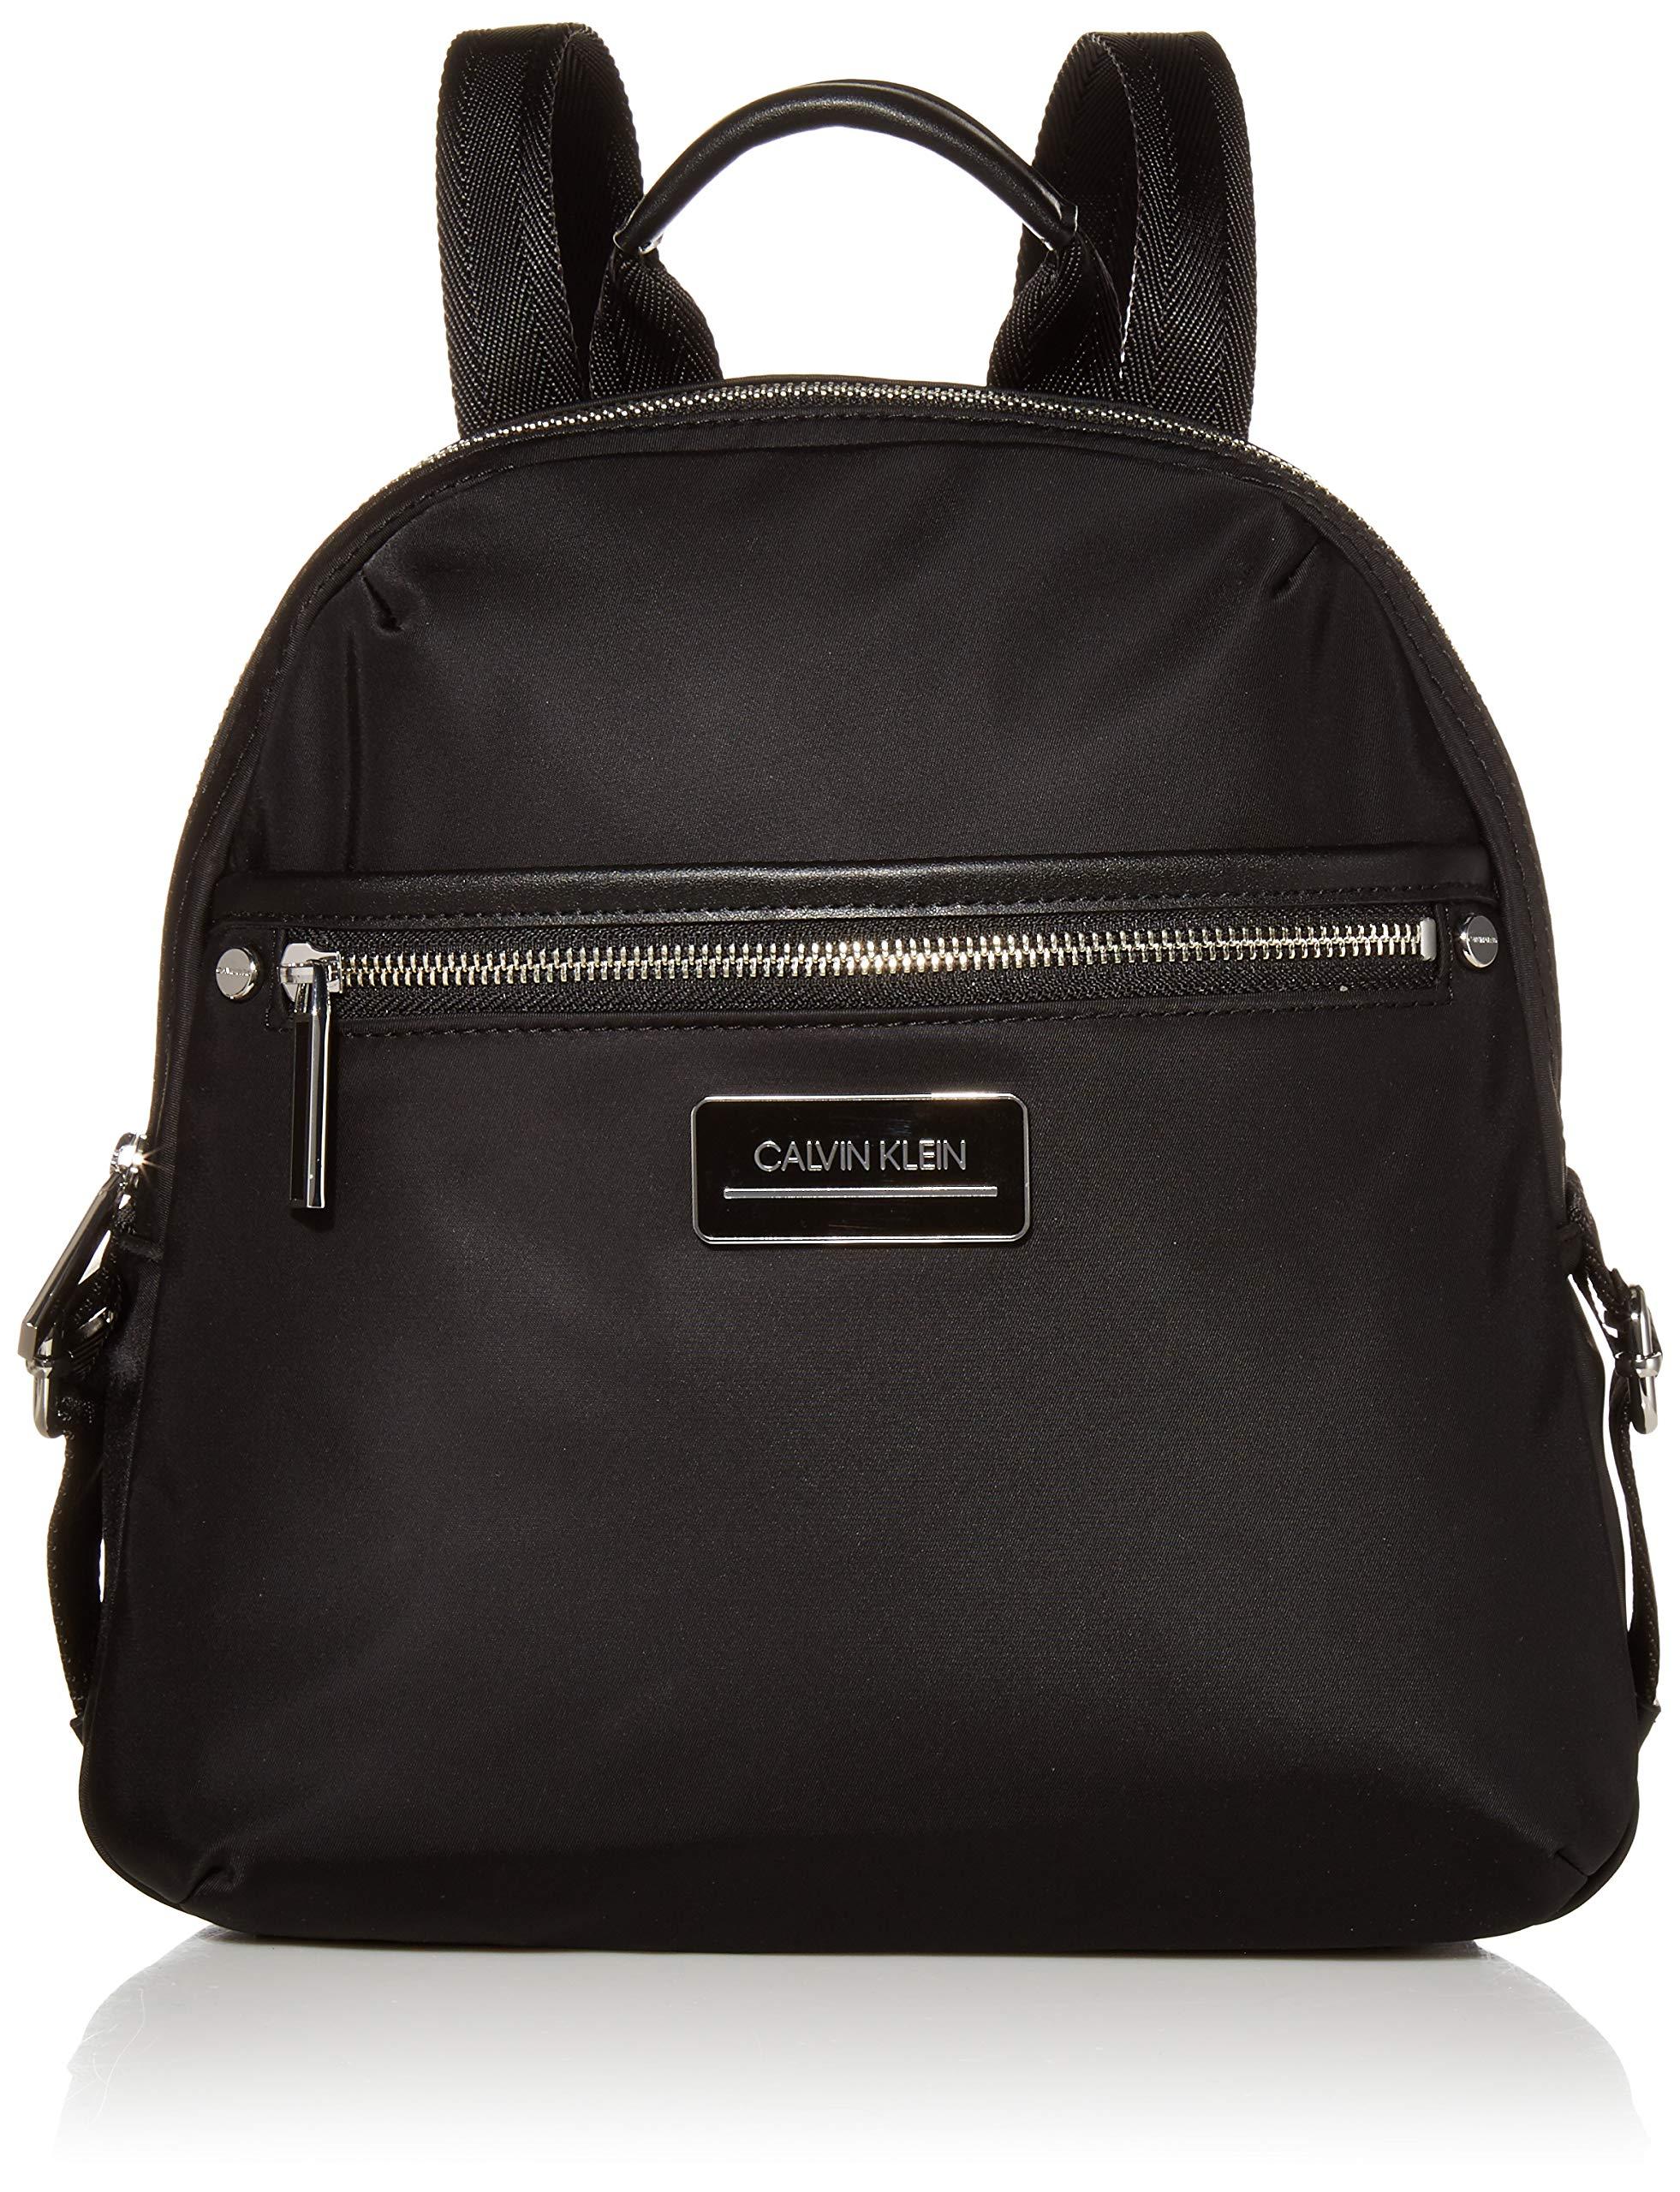 Calvin Klein Synthetic Sussex Nylon Backpack in Black/Silver (Black) - Lyst